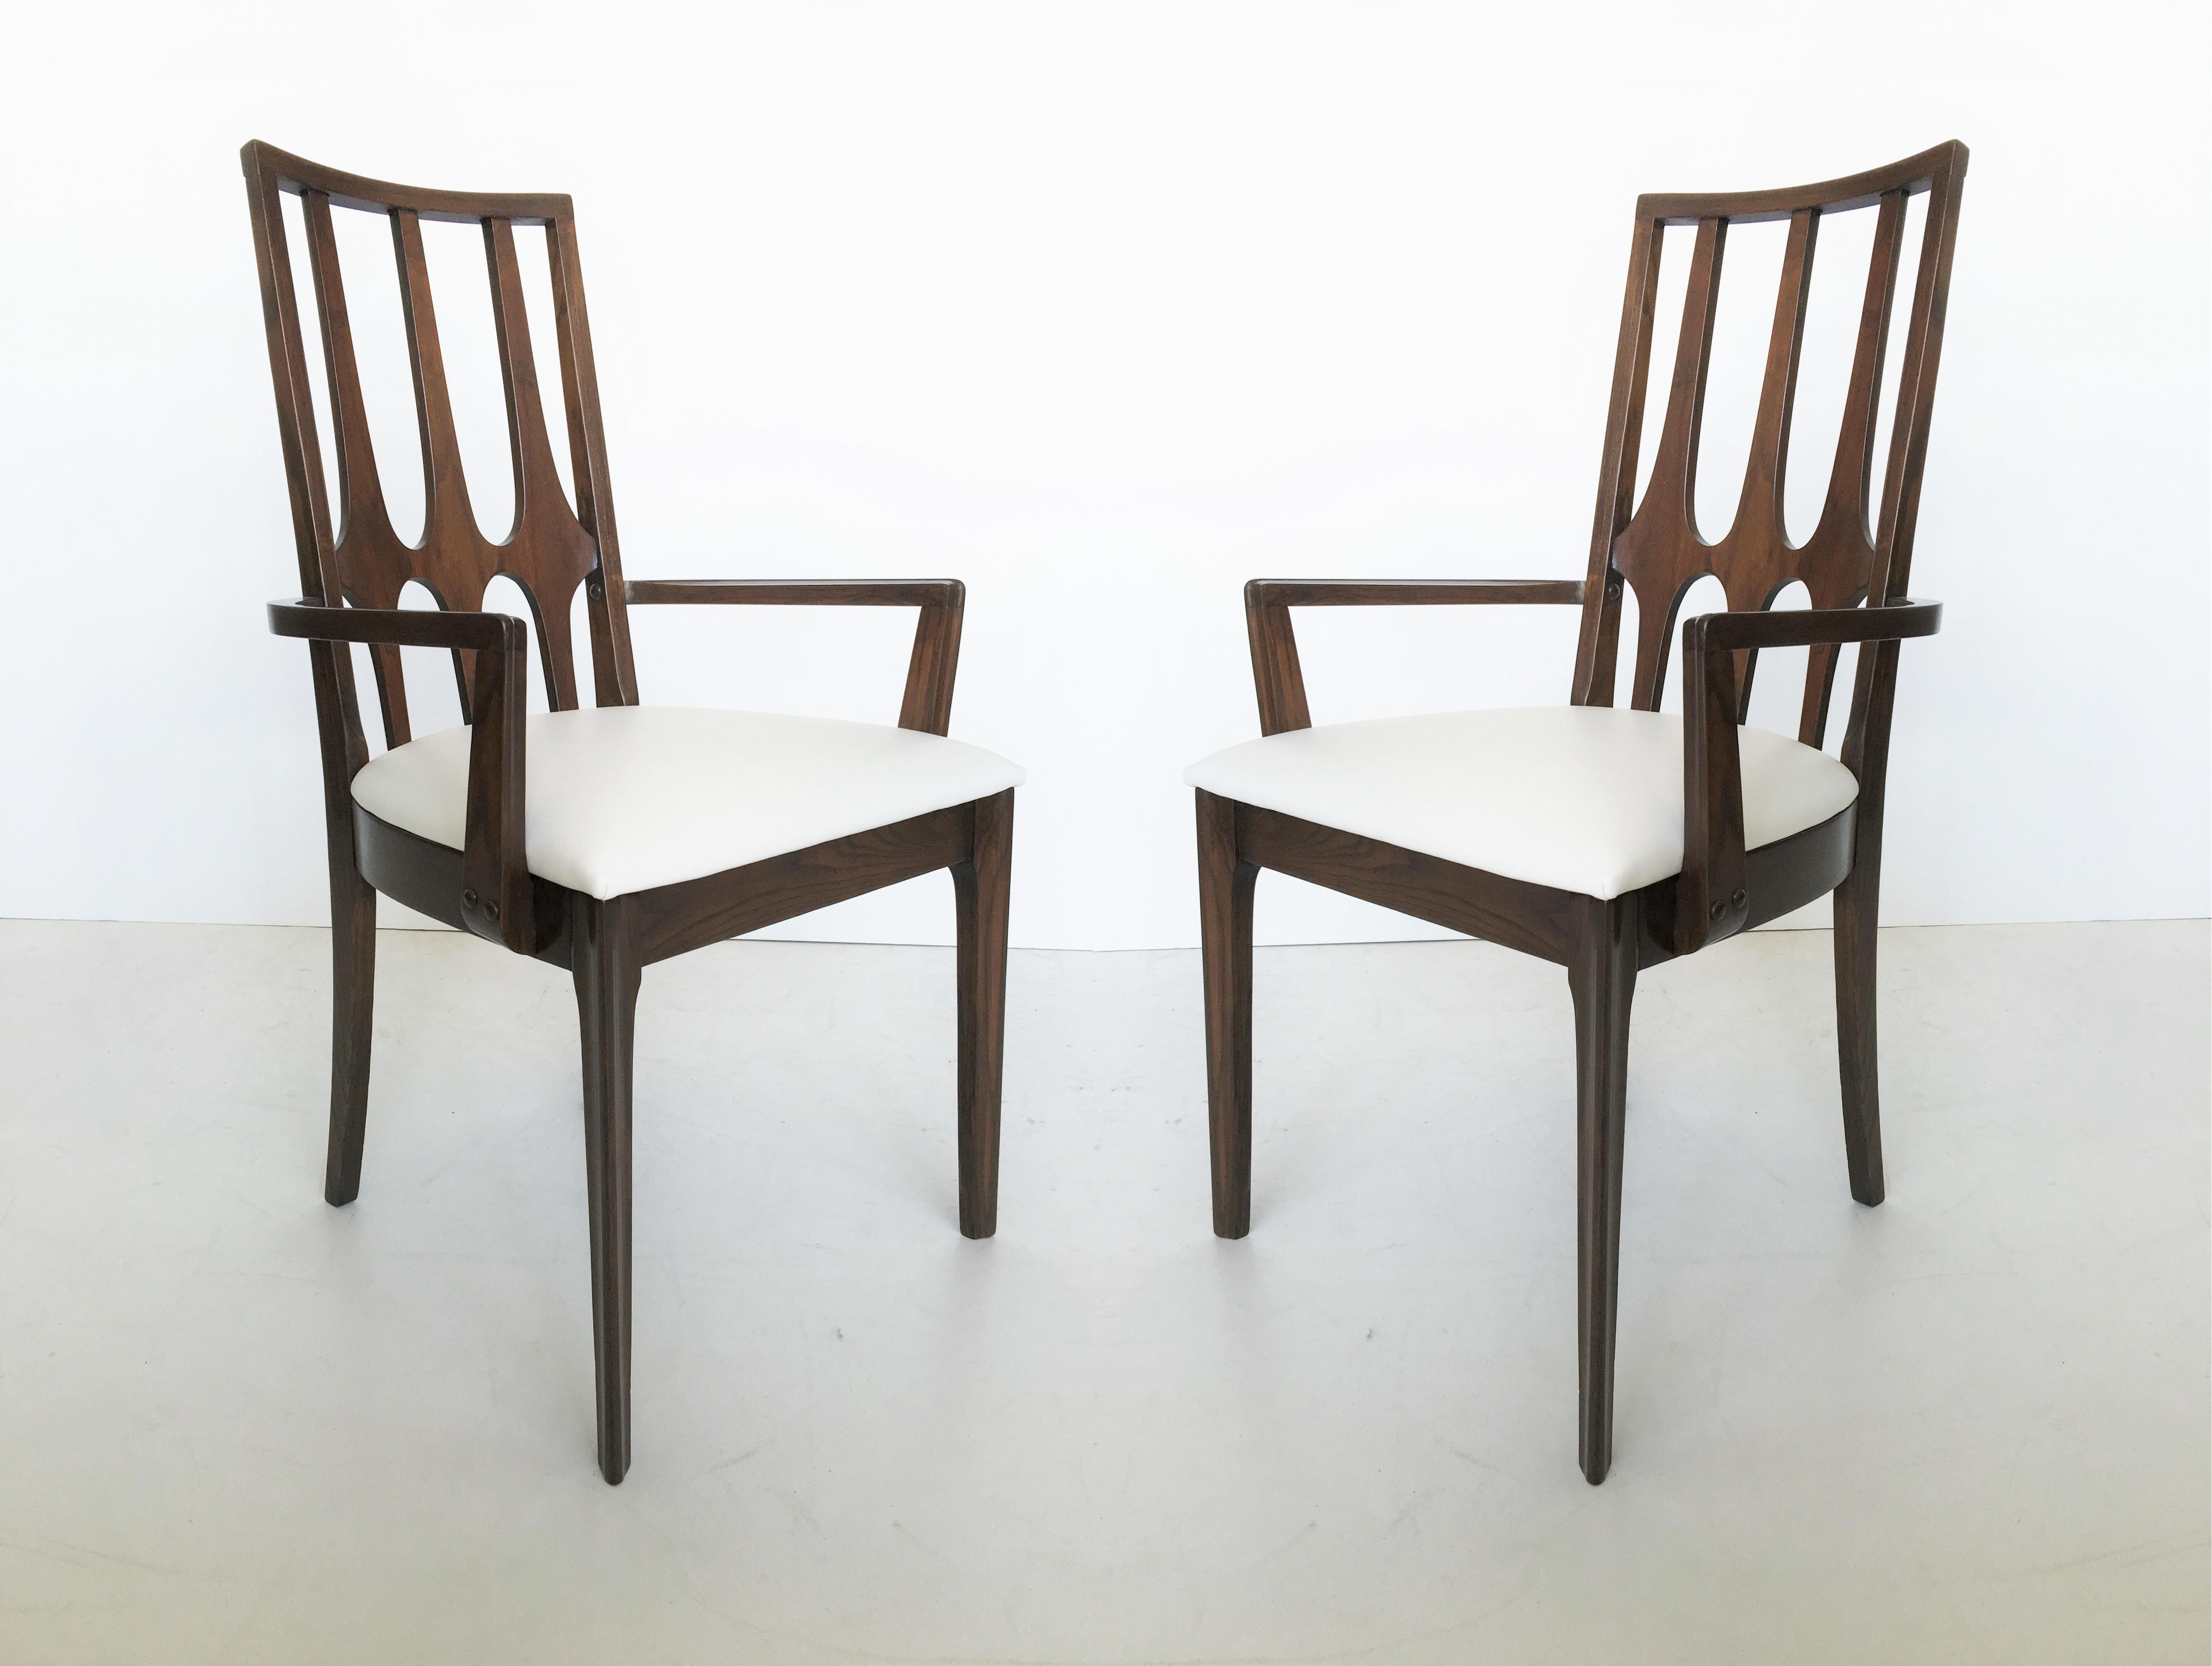 Set of 8 vintage walnut dining chairs manufactured by Broyhill for the Brasilia collection, circa early 1960s. It is such a unique design based upon a world-class architect designs for the then new city of Brasila, the 